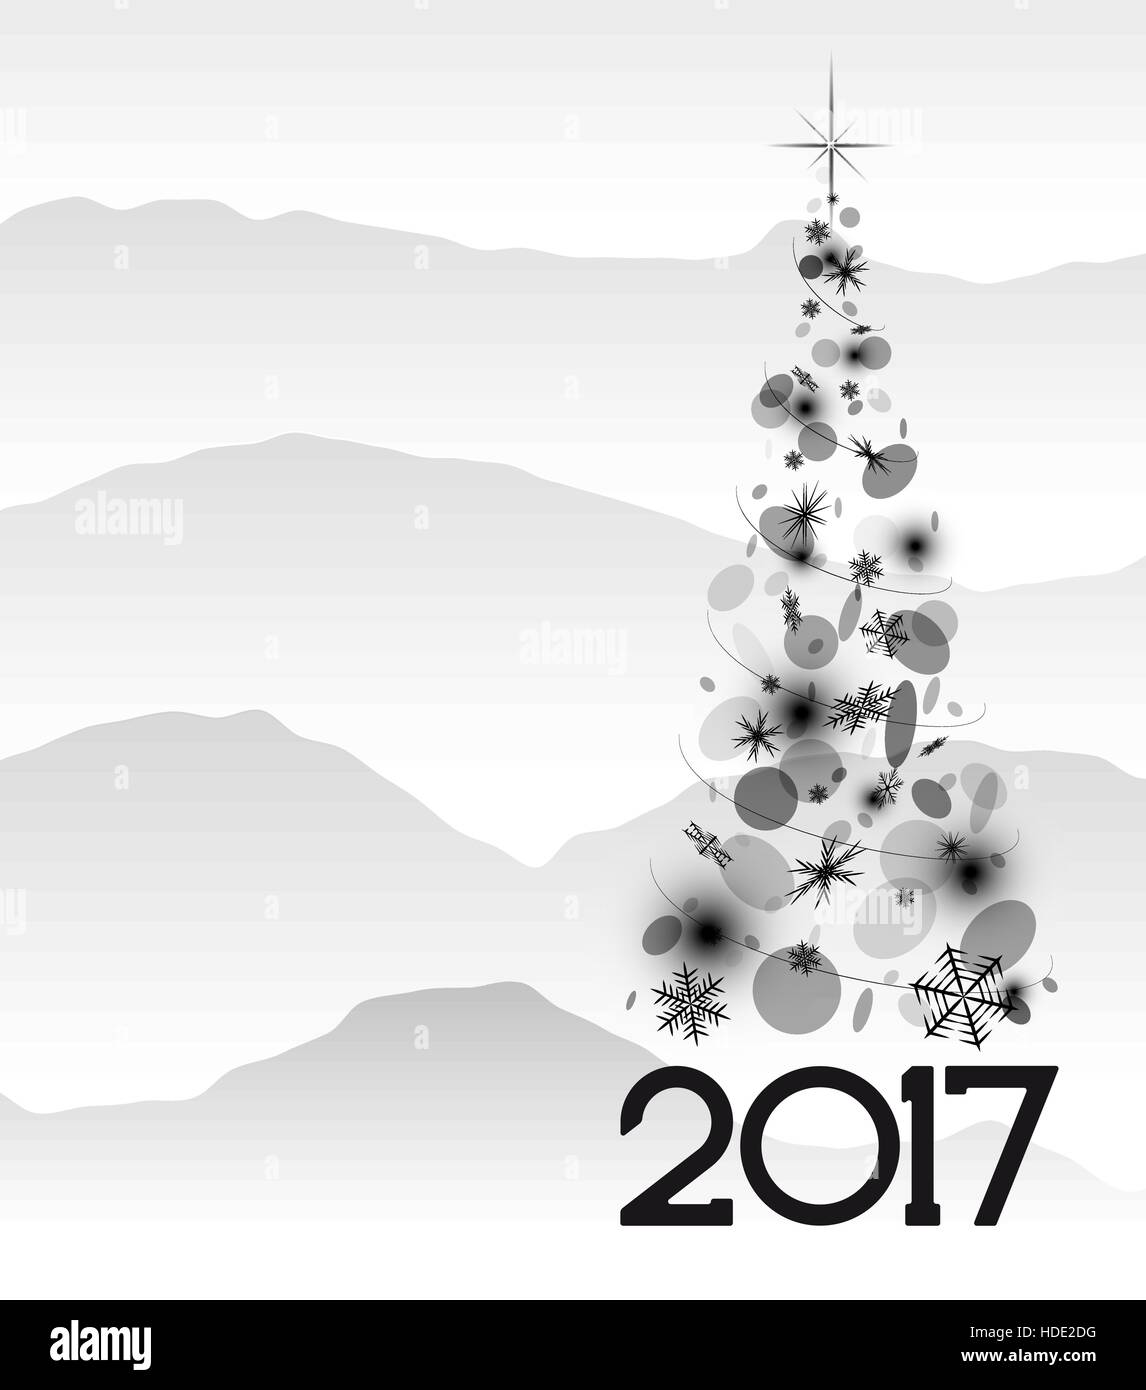 Christmas card with fir tree in 2017. White and snow. Stock Vector